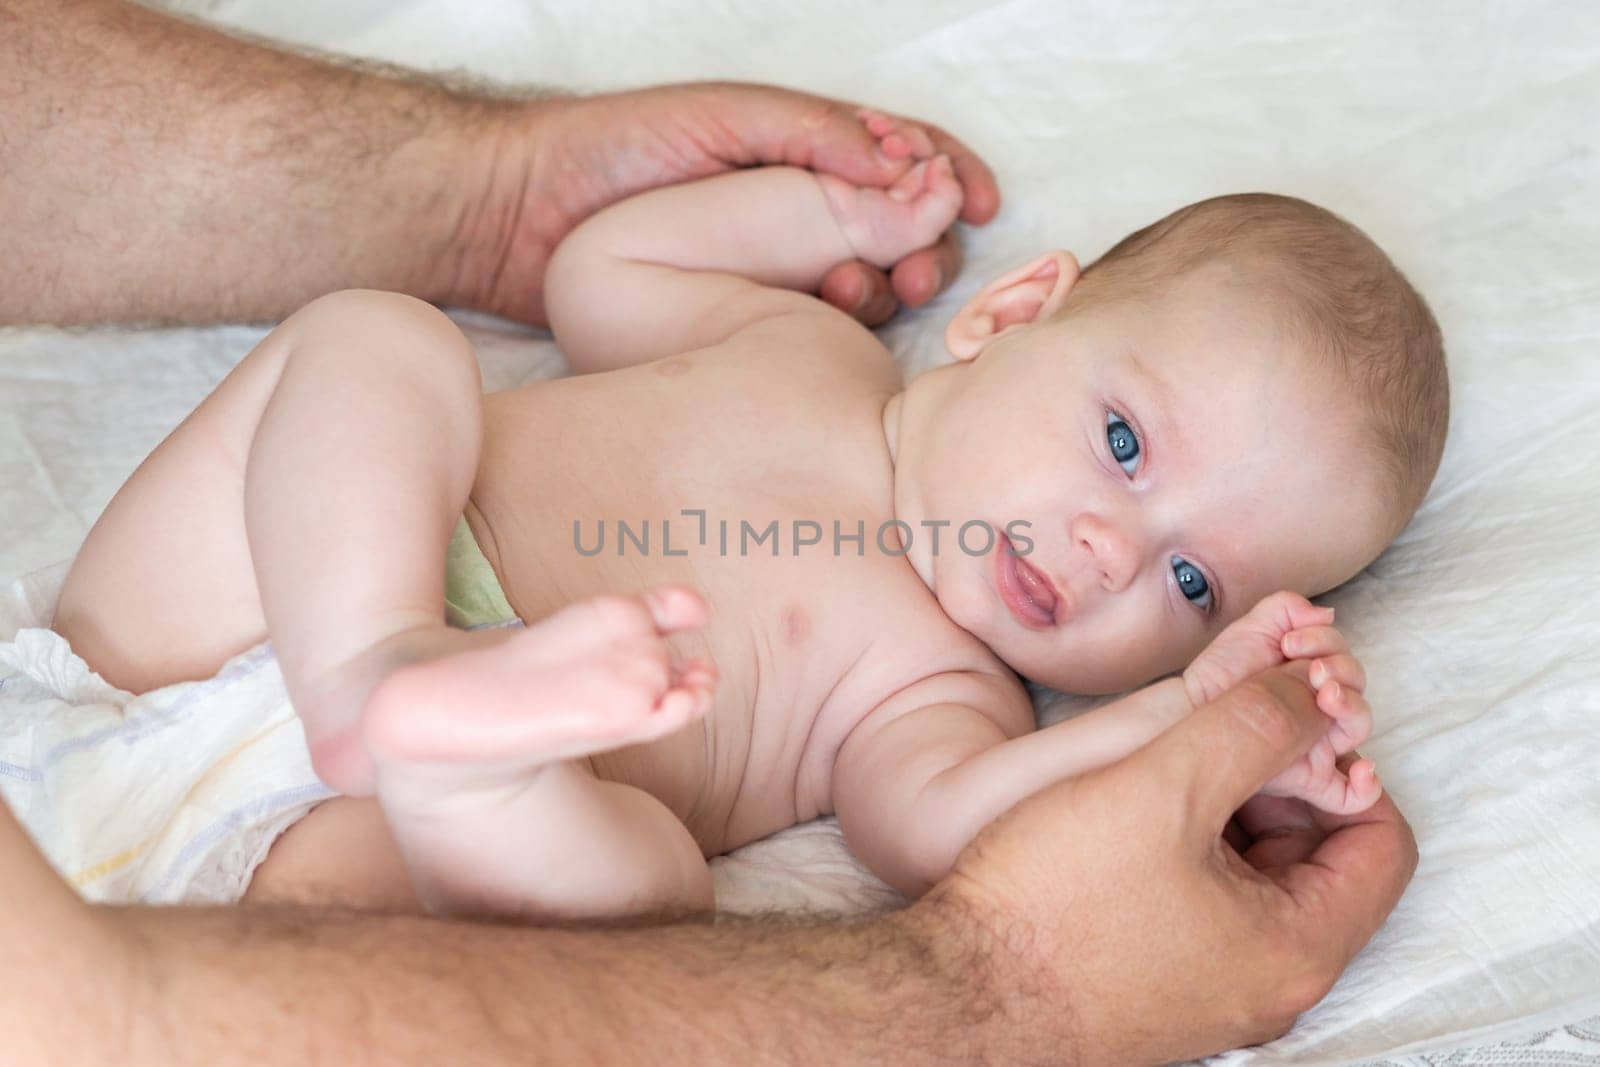 With skilled hands, a masseur delivers a therapeutic massage to a restful infant